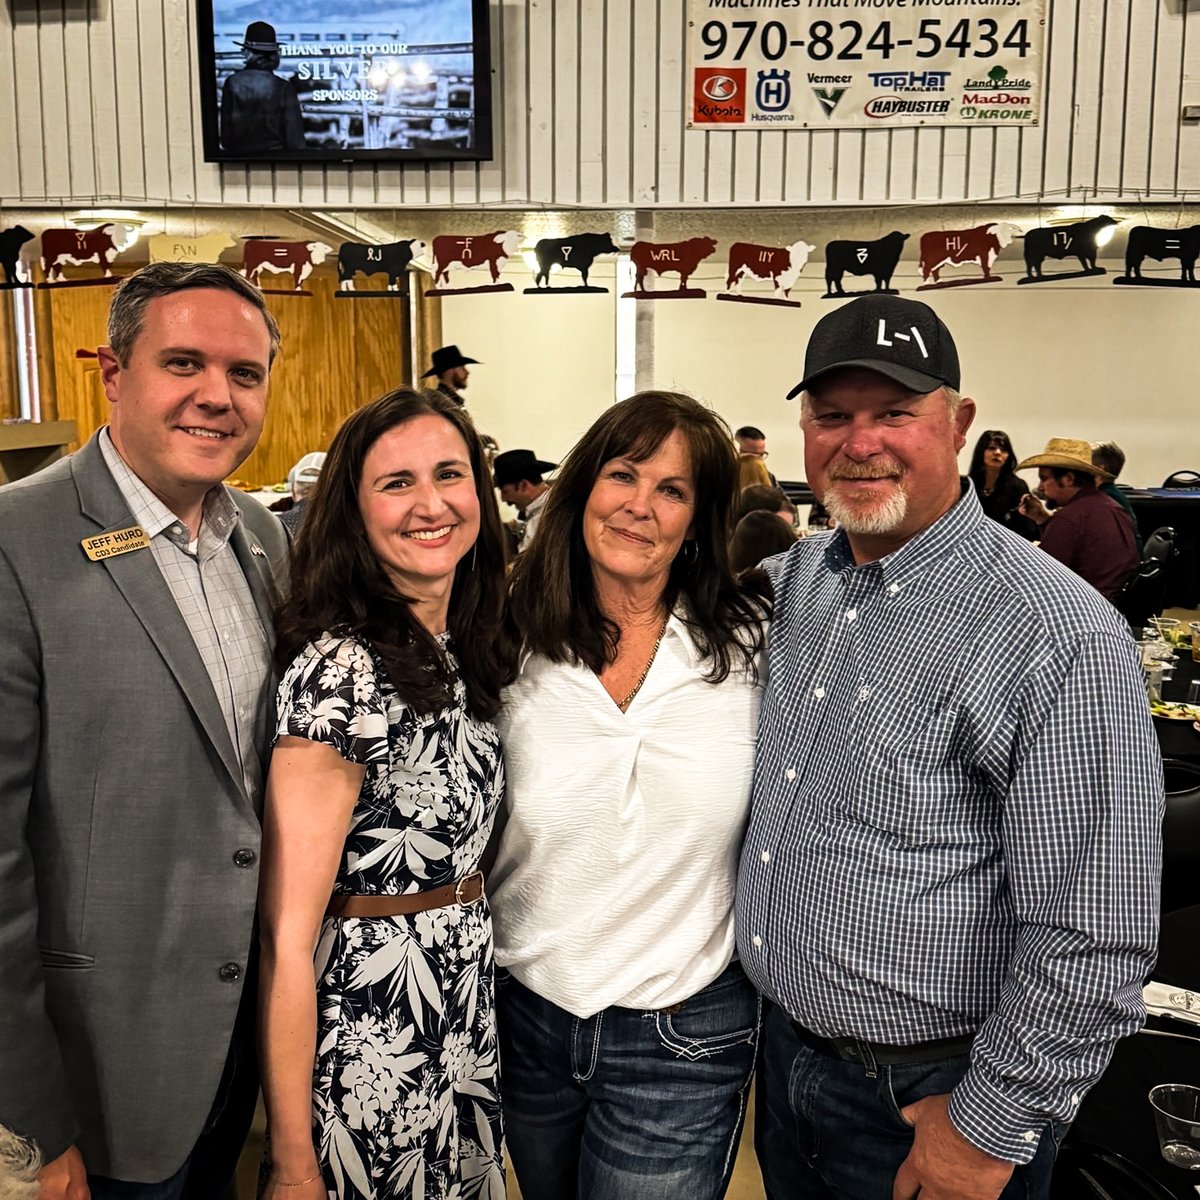 It was an honor to address the Rio Blanco Stockgrowers at their annual banquet. It was packed and it was great to reconnect with old friends and meet so many new ones. Rio Blanco County is undoubtedly #betterwithbeef and #betterwithlamb! 🥩 🐑 #CO03